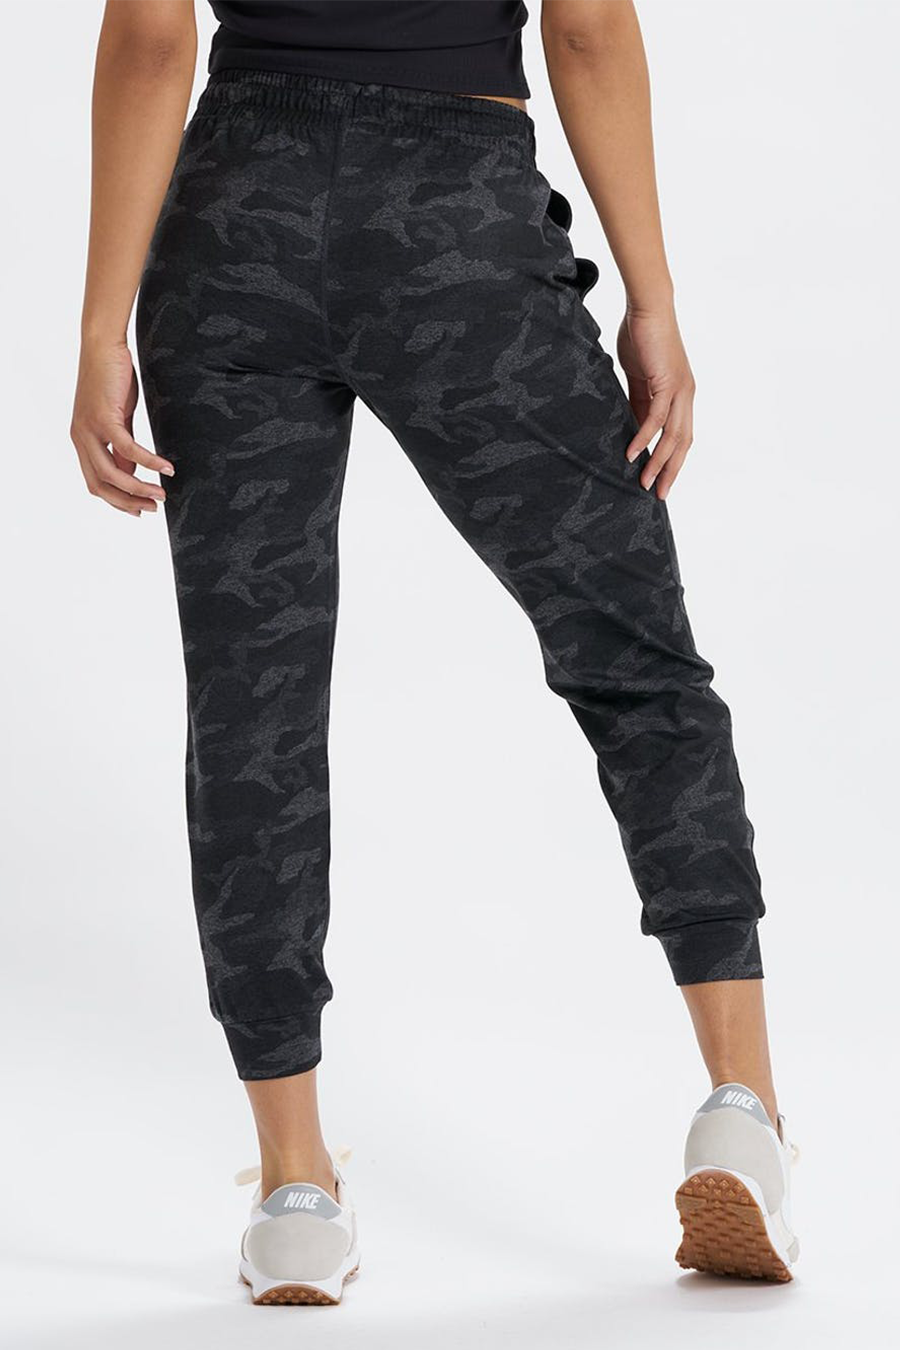 Performance Jogger | Black Camo - Main Image Number 2 of 2